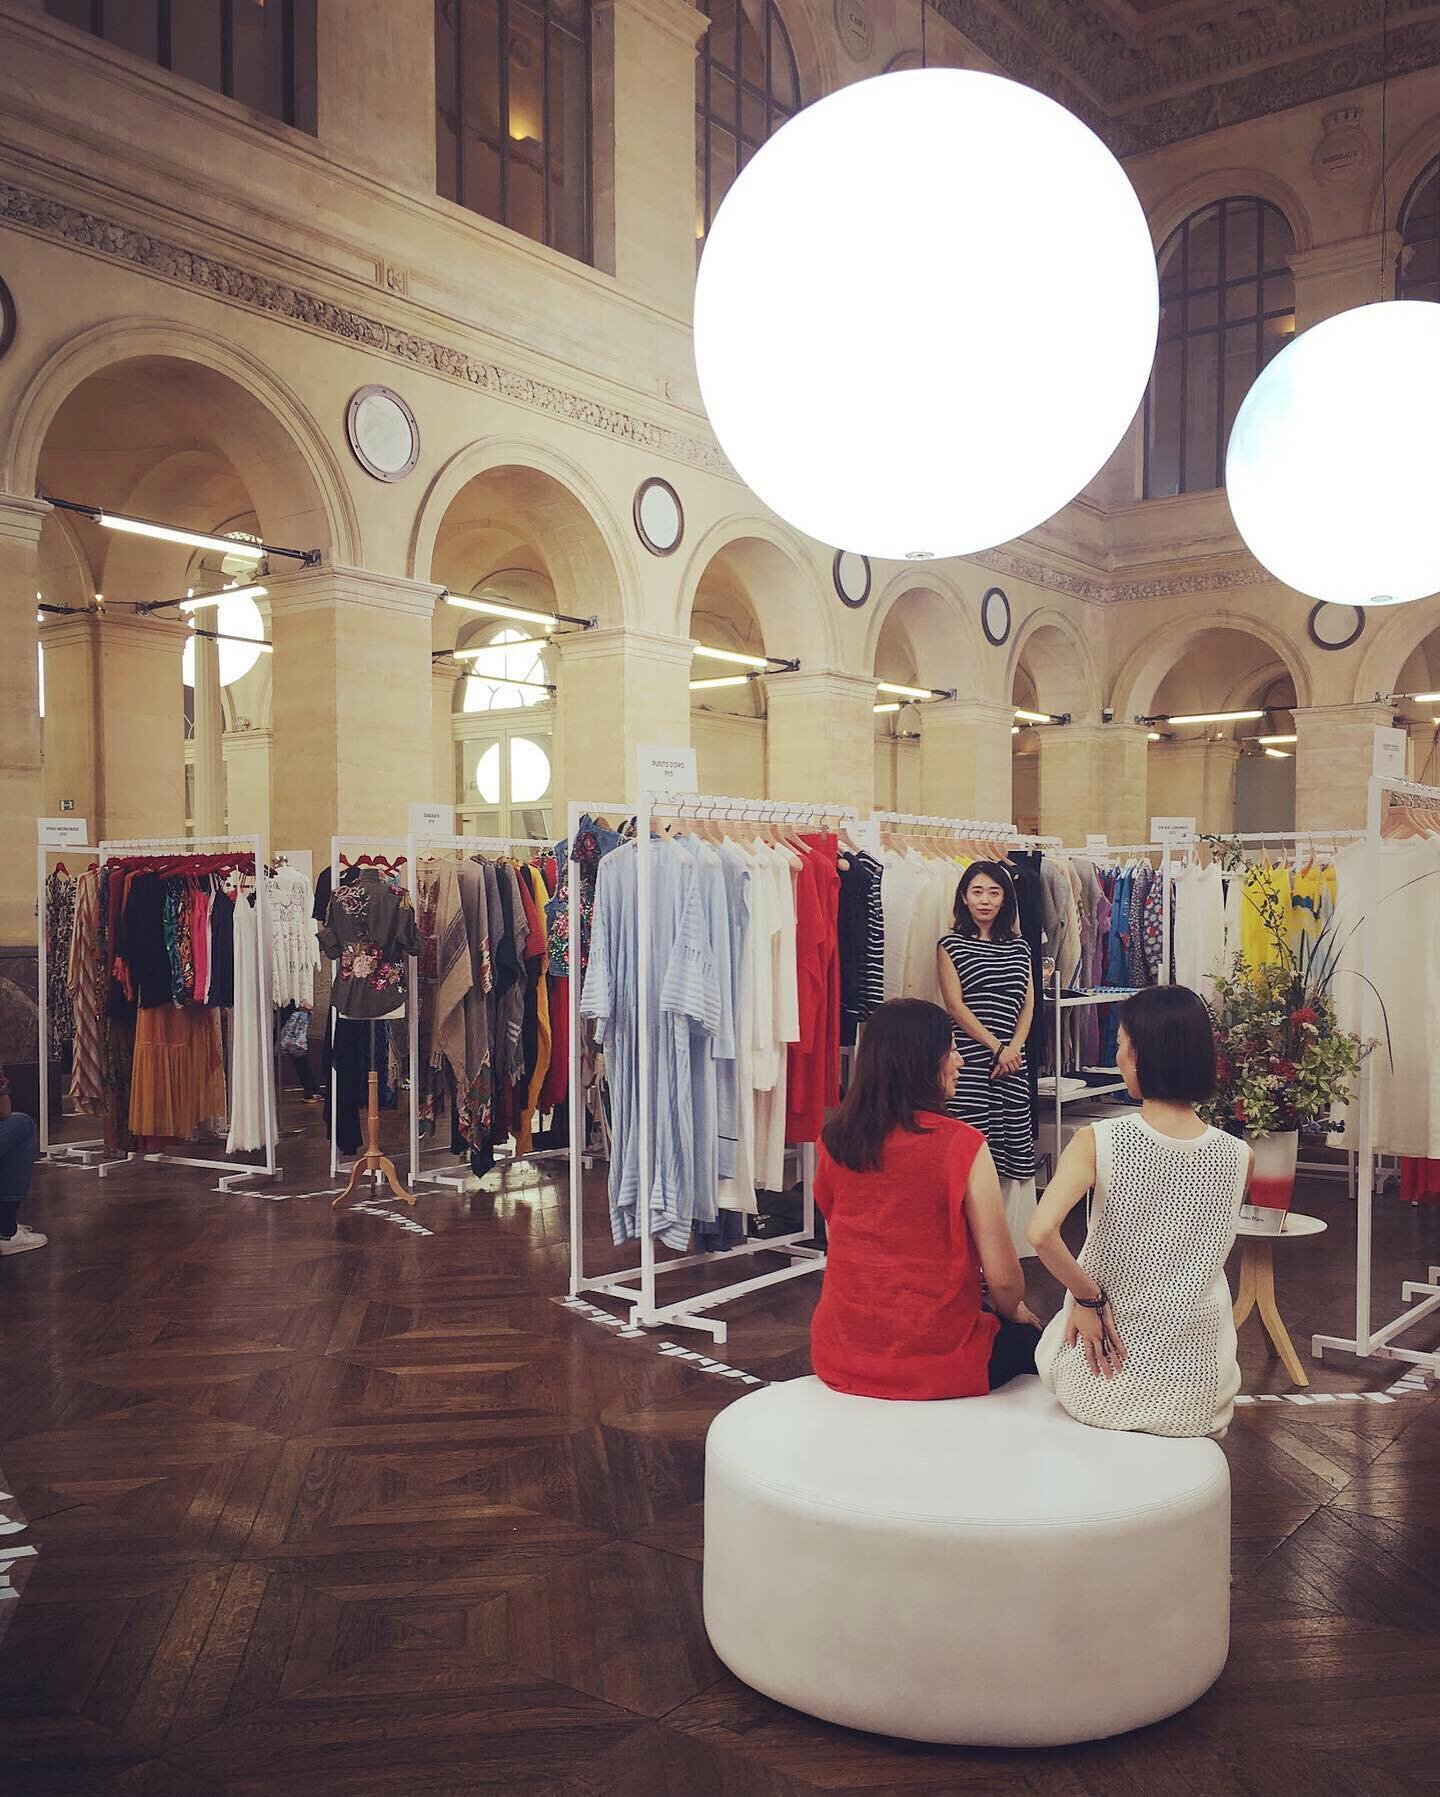 took a little instagram hiatus for a few months, but now I am back and reminiscing about Paris Fashion Week last October when I was perusing all the beautiful collections @tranoi_show 🏷
.
.
#throwbackthursday #tbt #tradefair #parisfashion #frenchfas